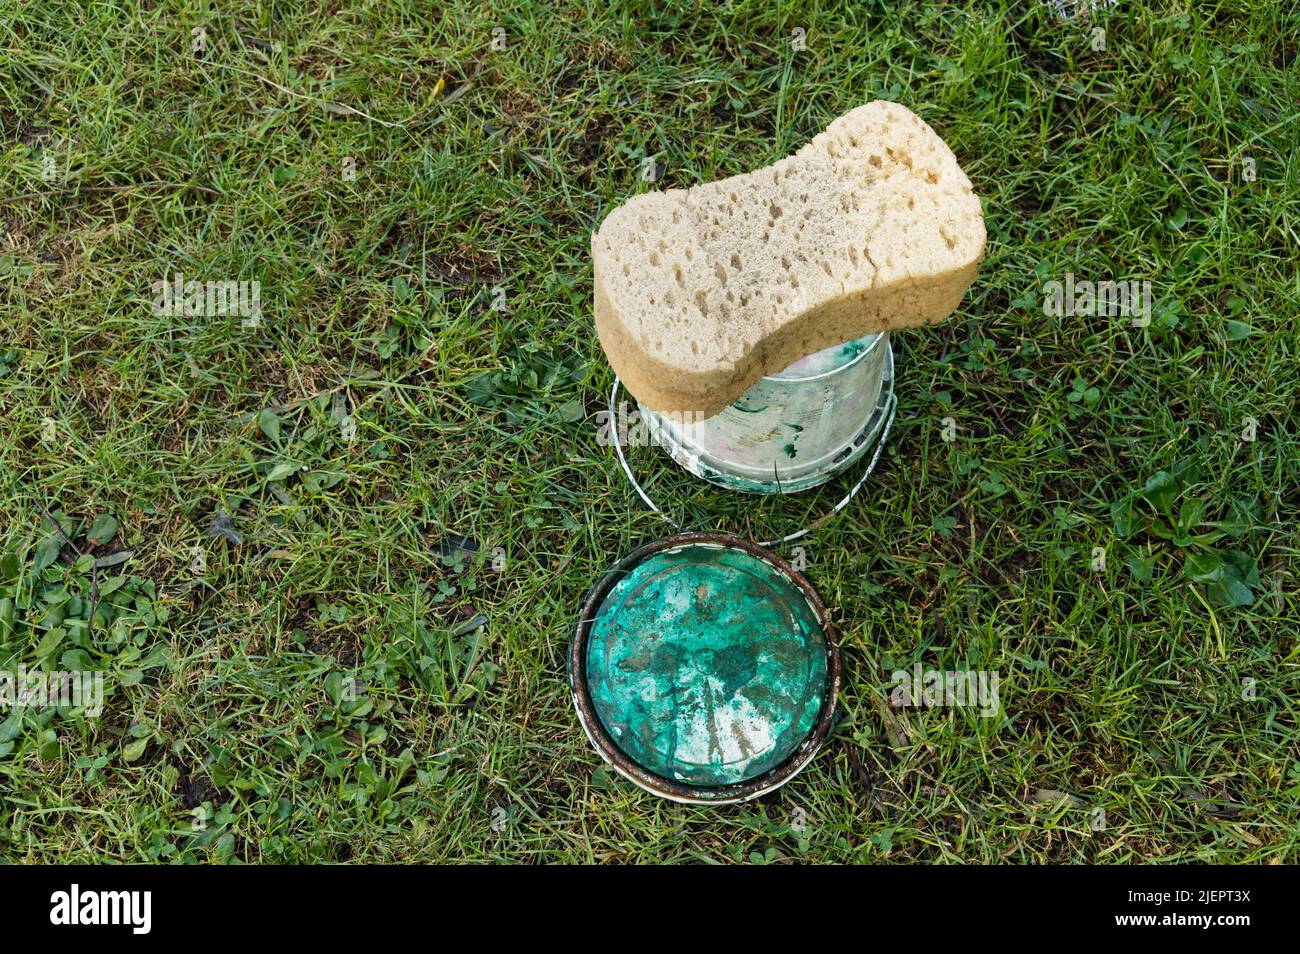 A sponge sits on top of an upsidedown bucket, it has been used to clean up after painting. Stock Photo